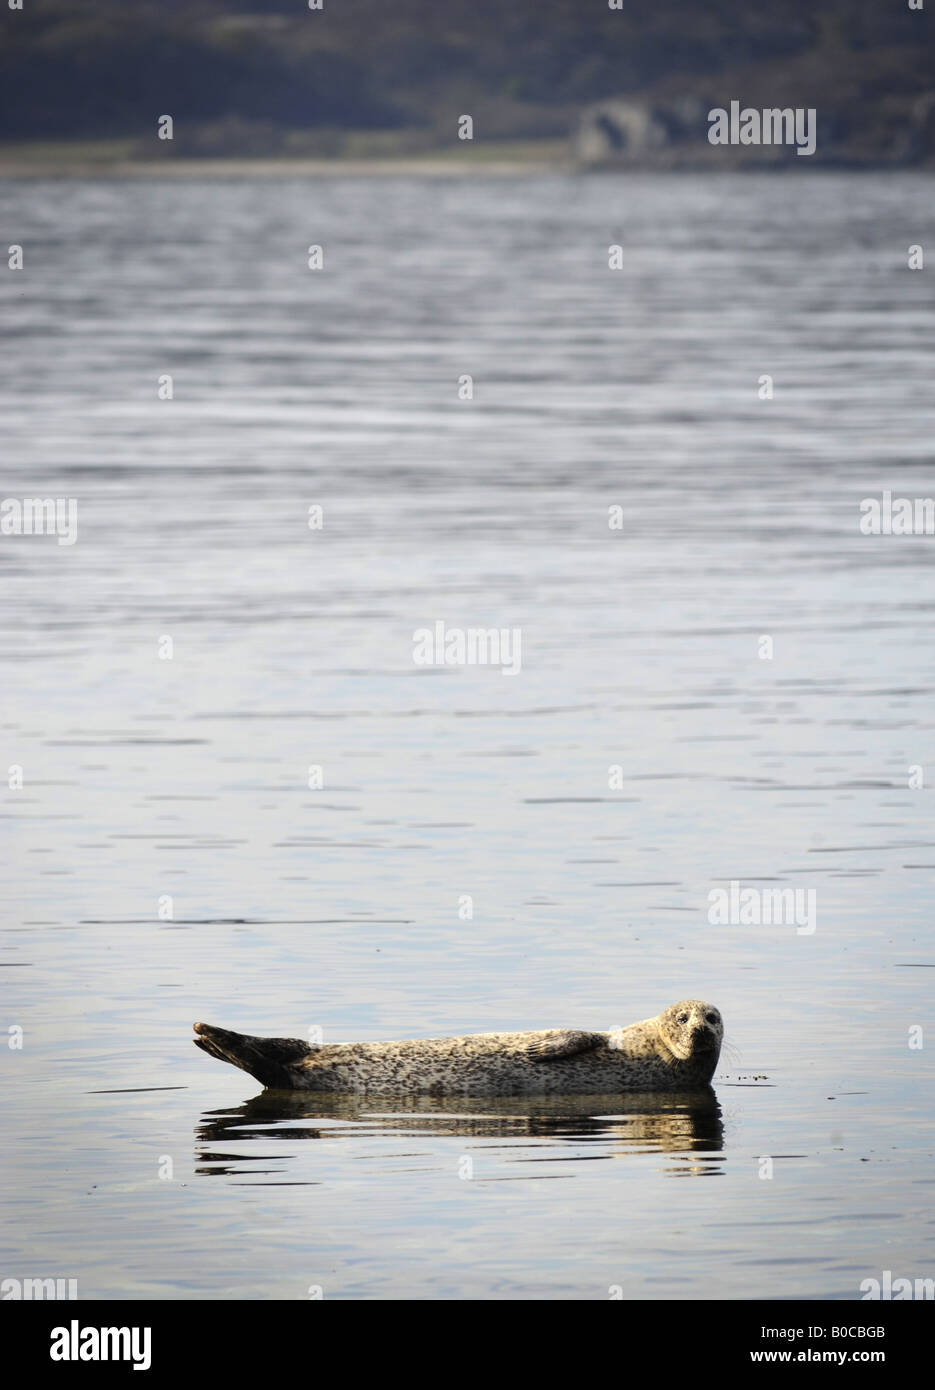 A COMMOM SEAL IN WATERS OFF THE COAST OF KINTYRE IN NORTH WEST,SCOTLAND,UK. Stock Photo